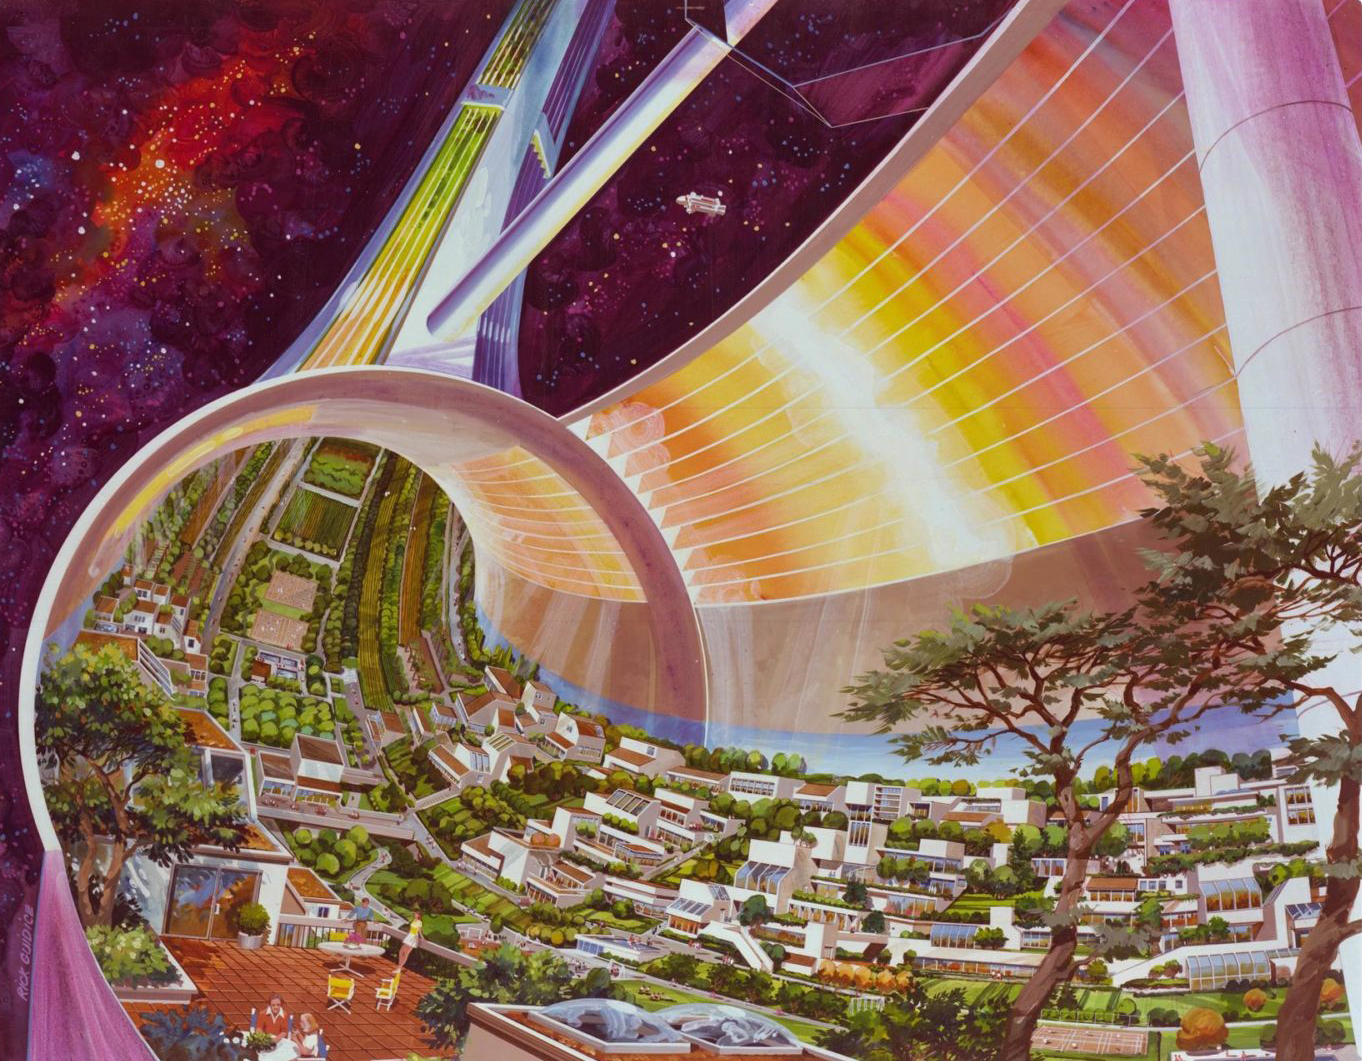 Artist's concept of a space colony.